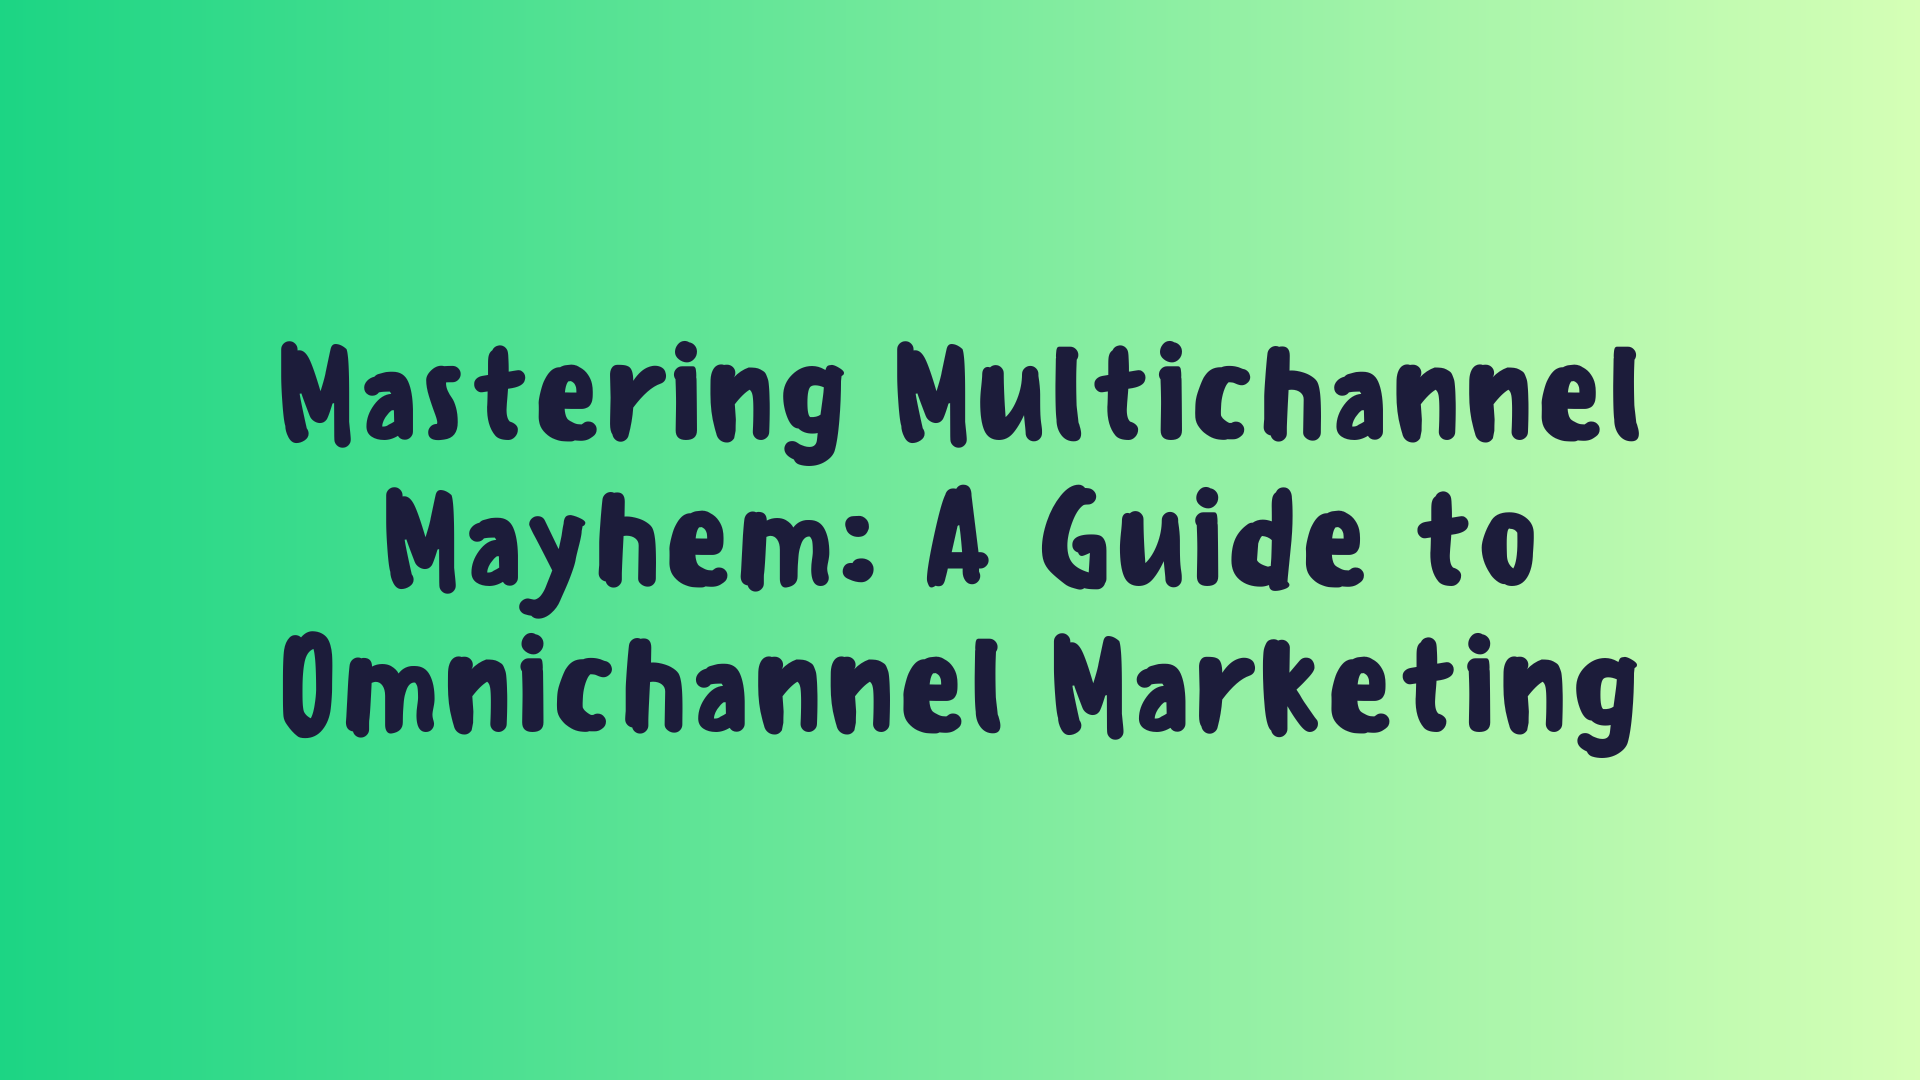 A Guide to Omnichannel Marketing